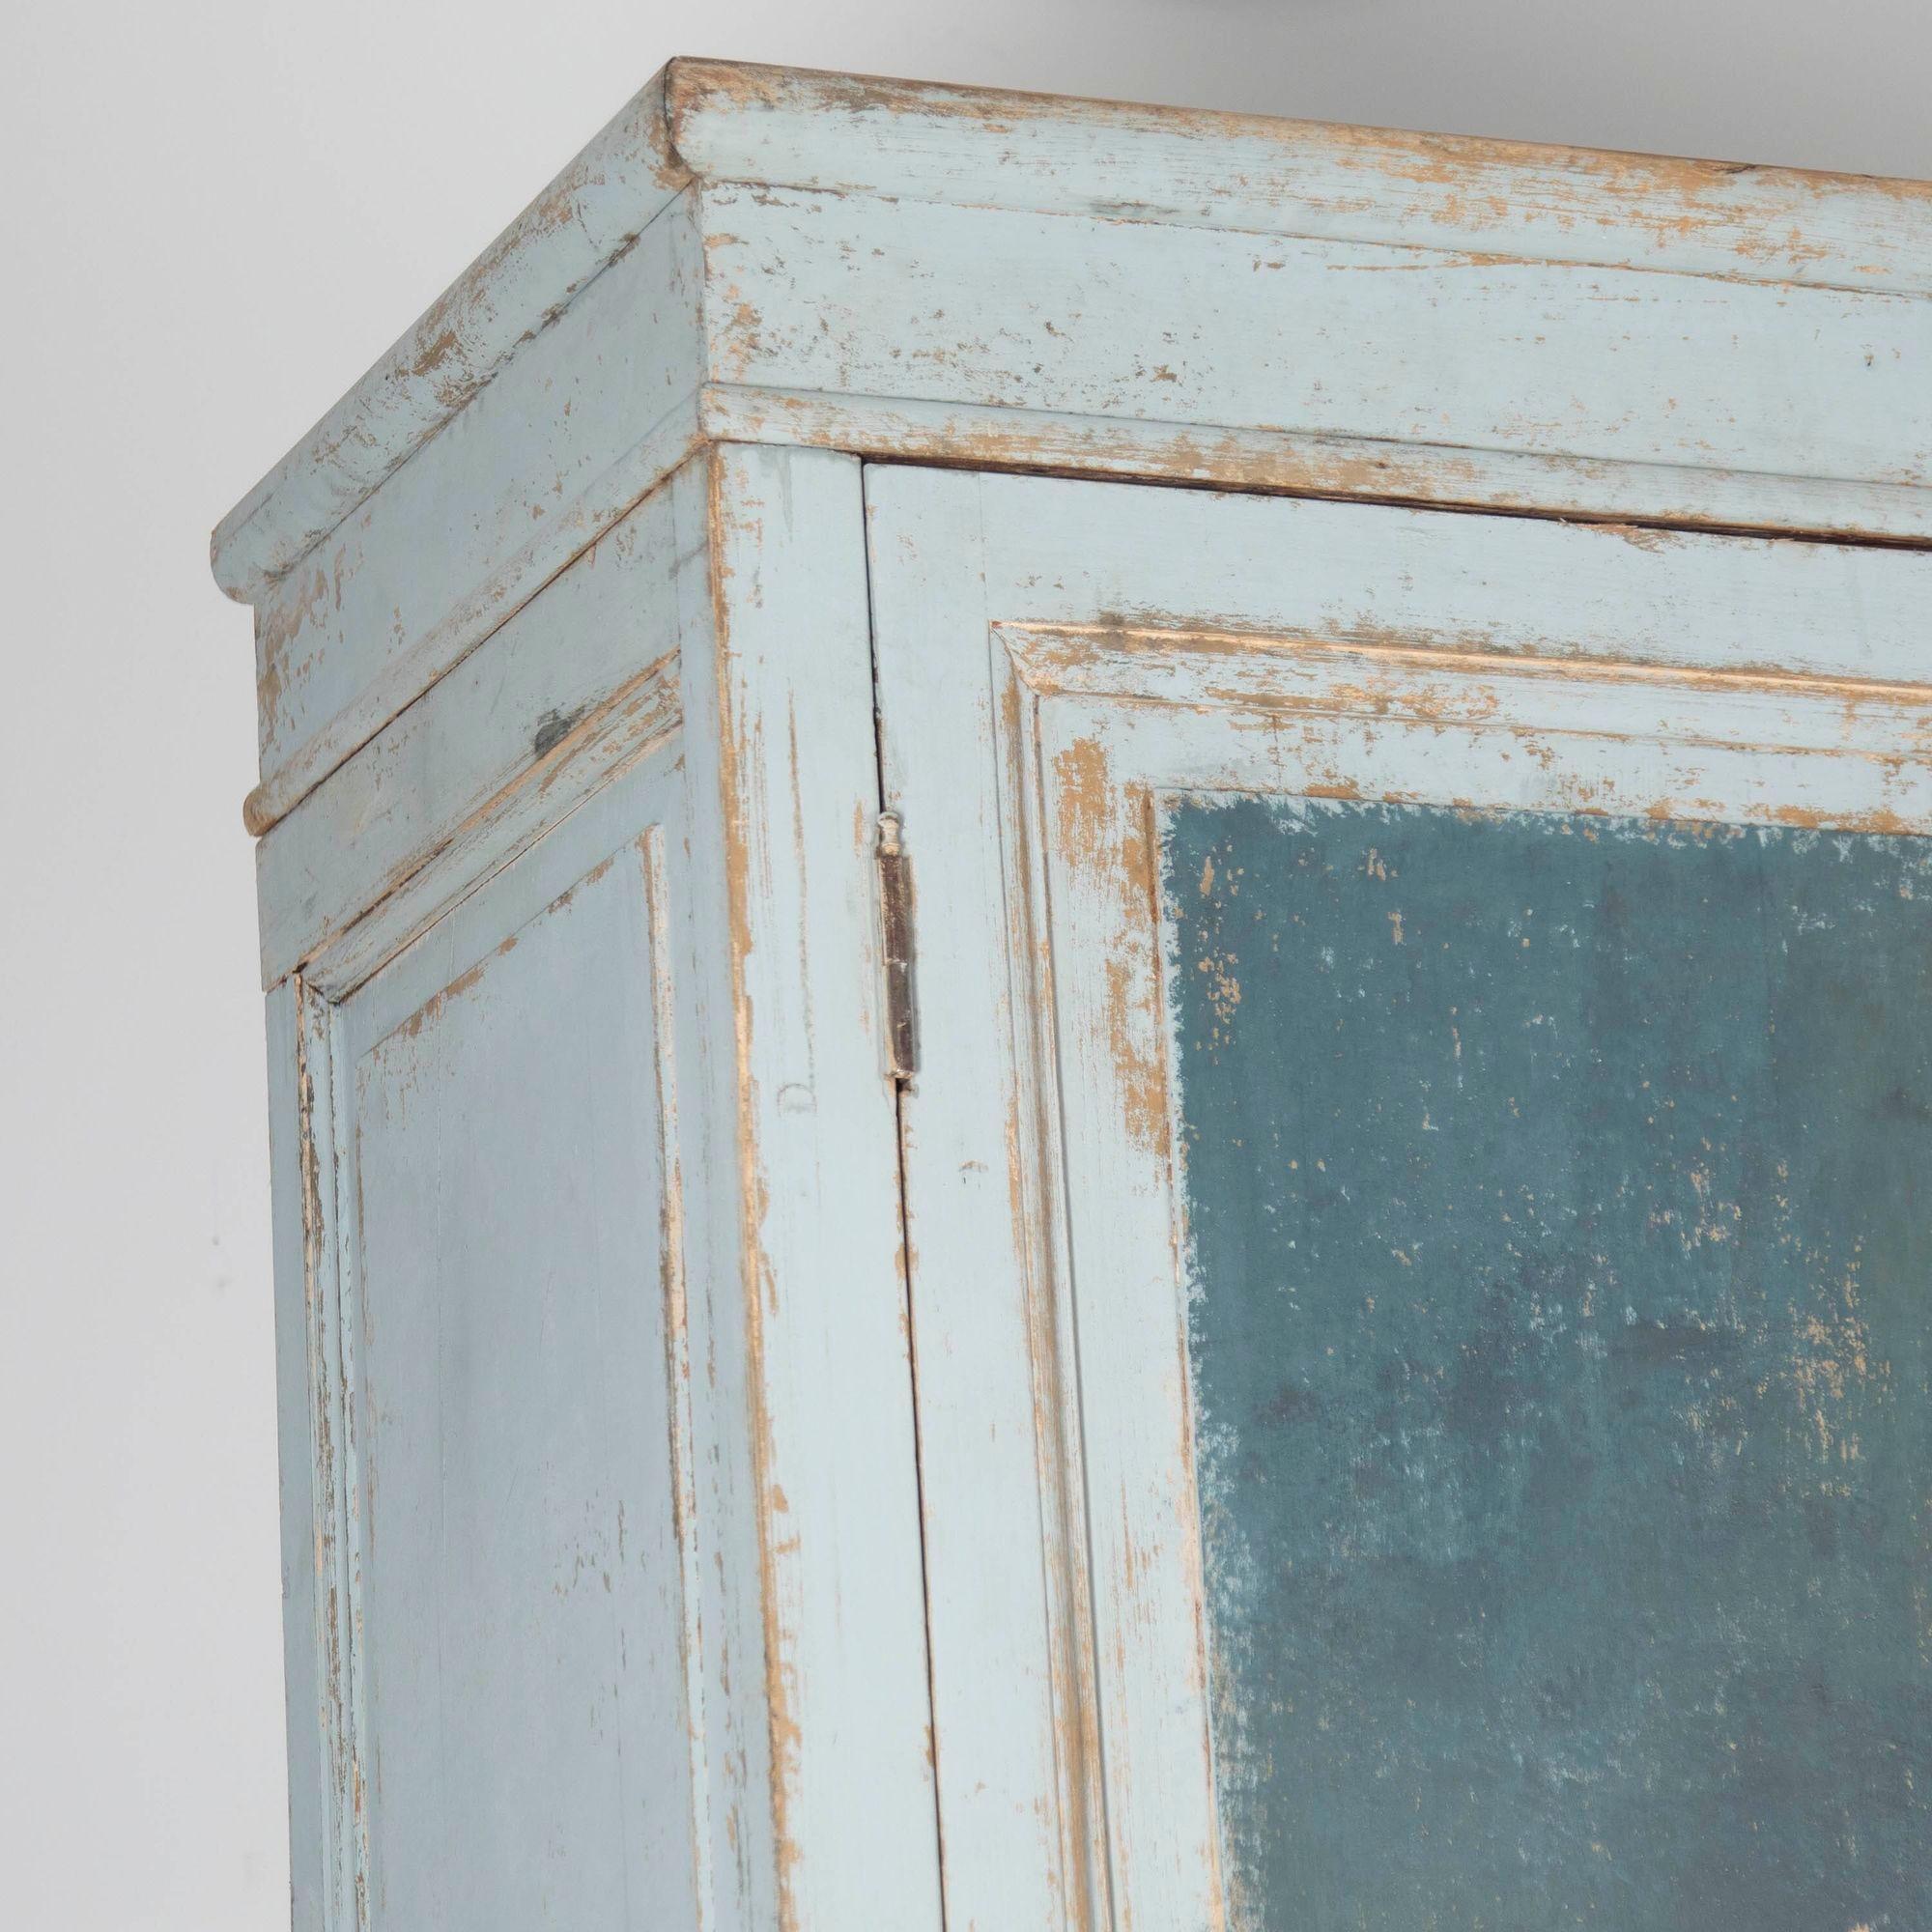 A magnificent, imposing scale, pair of beautiful Italian cupboards in worn old paint.
Provincially made, the cupboards are simply constructed in oak and pine and can easily flat-pack for transport.